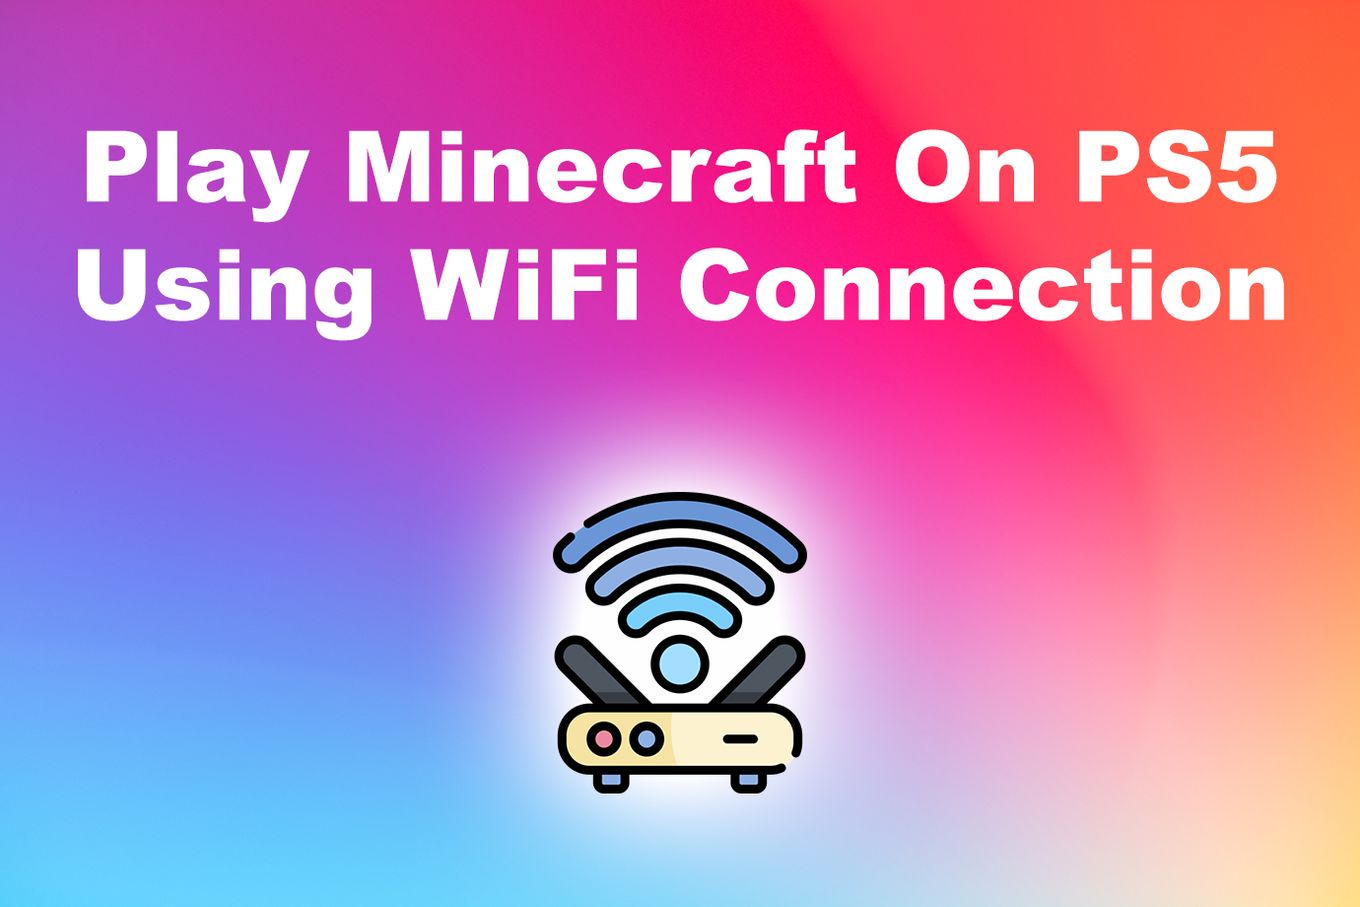 Play Minecraft on PS5 Using Wifi